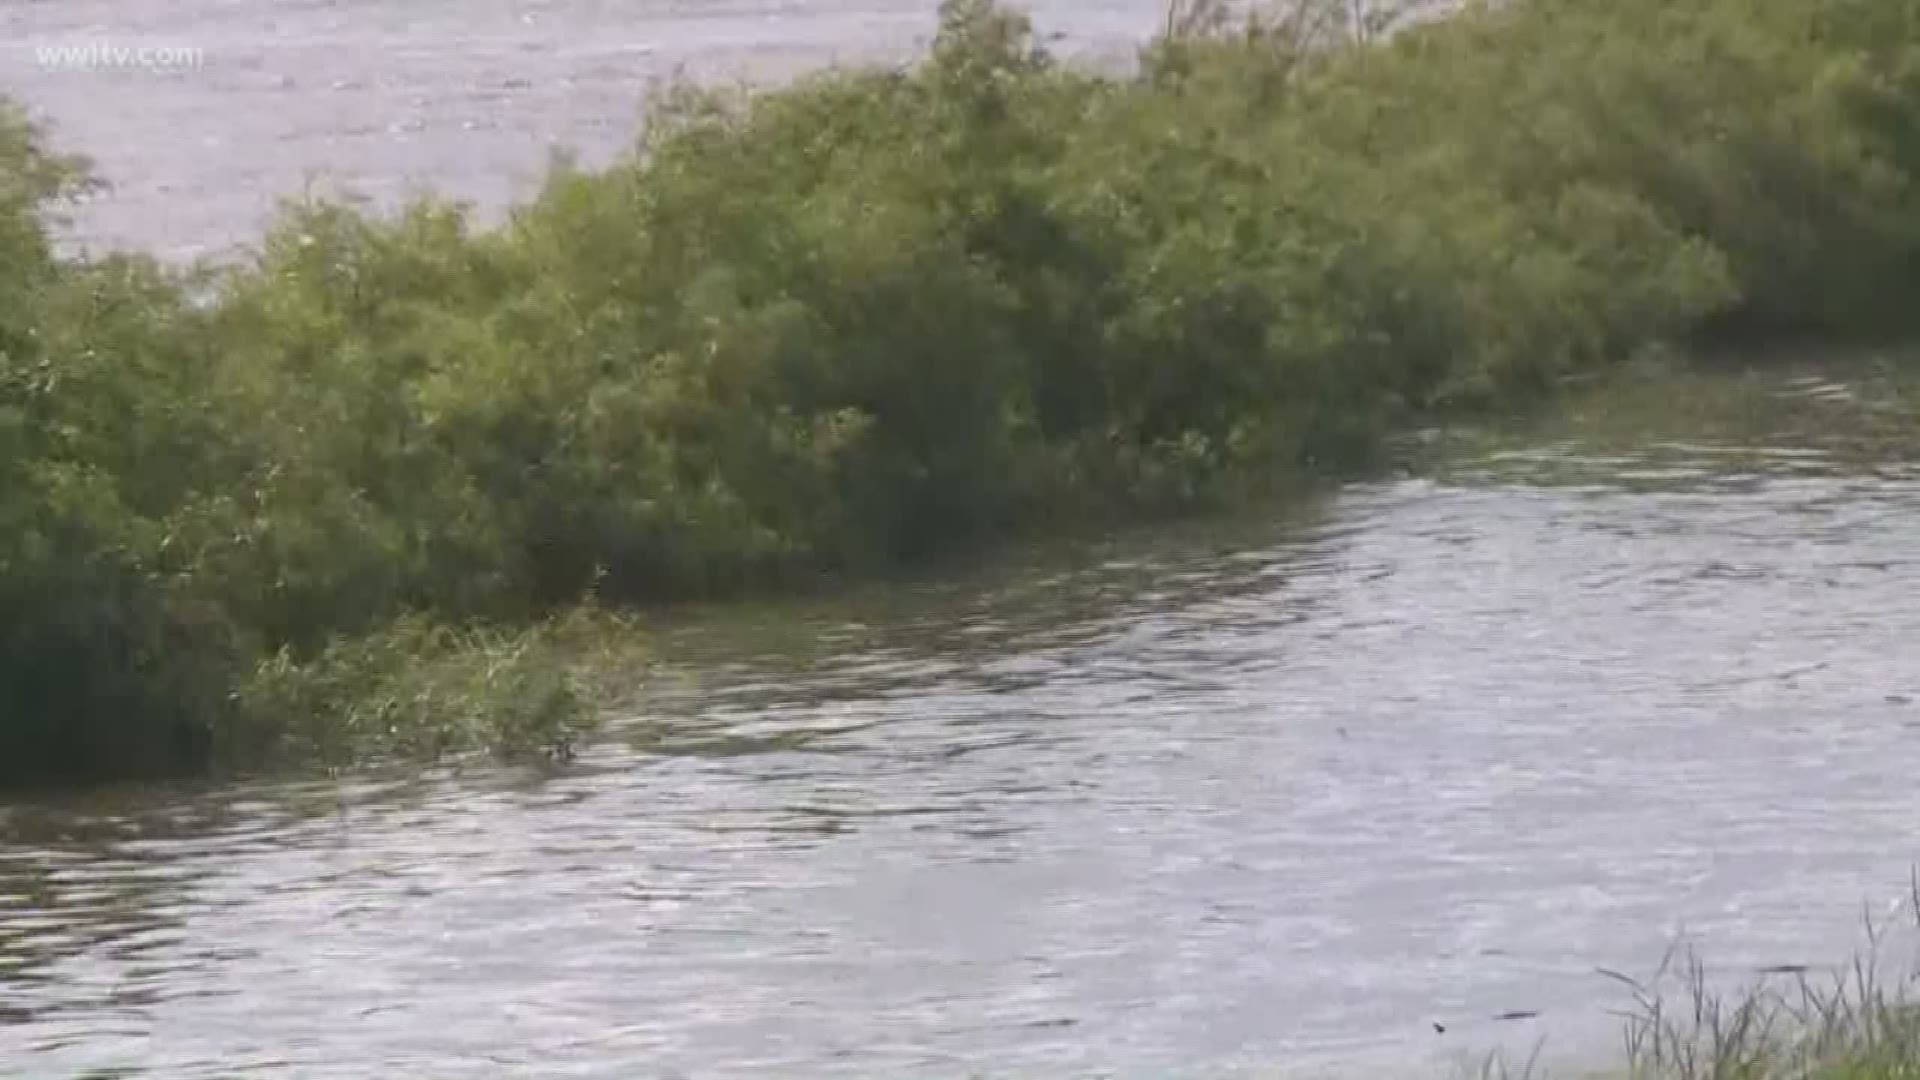 The National Weather Service predicts the storm surge could bring the Mississippi River up to 19 feet, just a foot below the height of some of the levees.